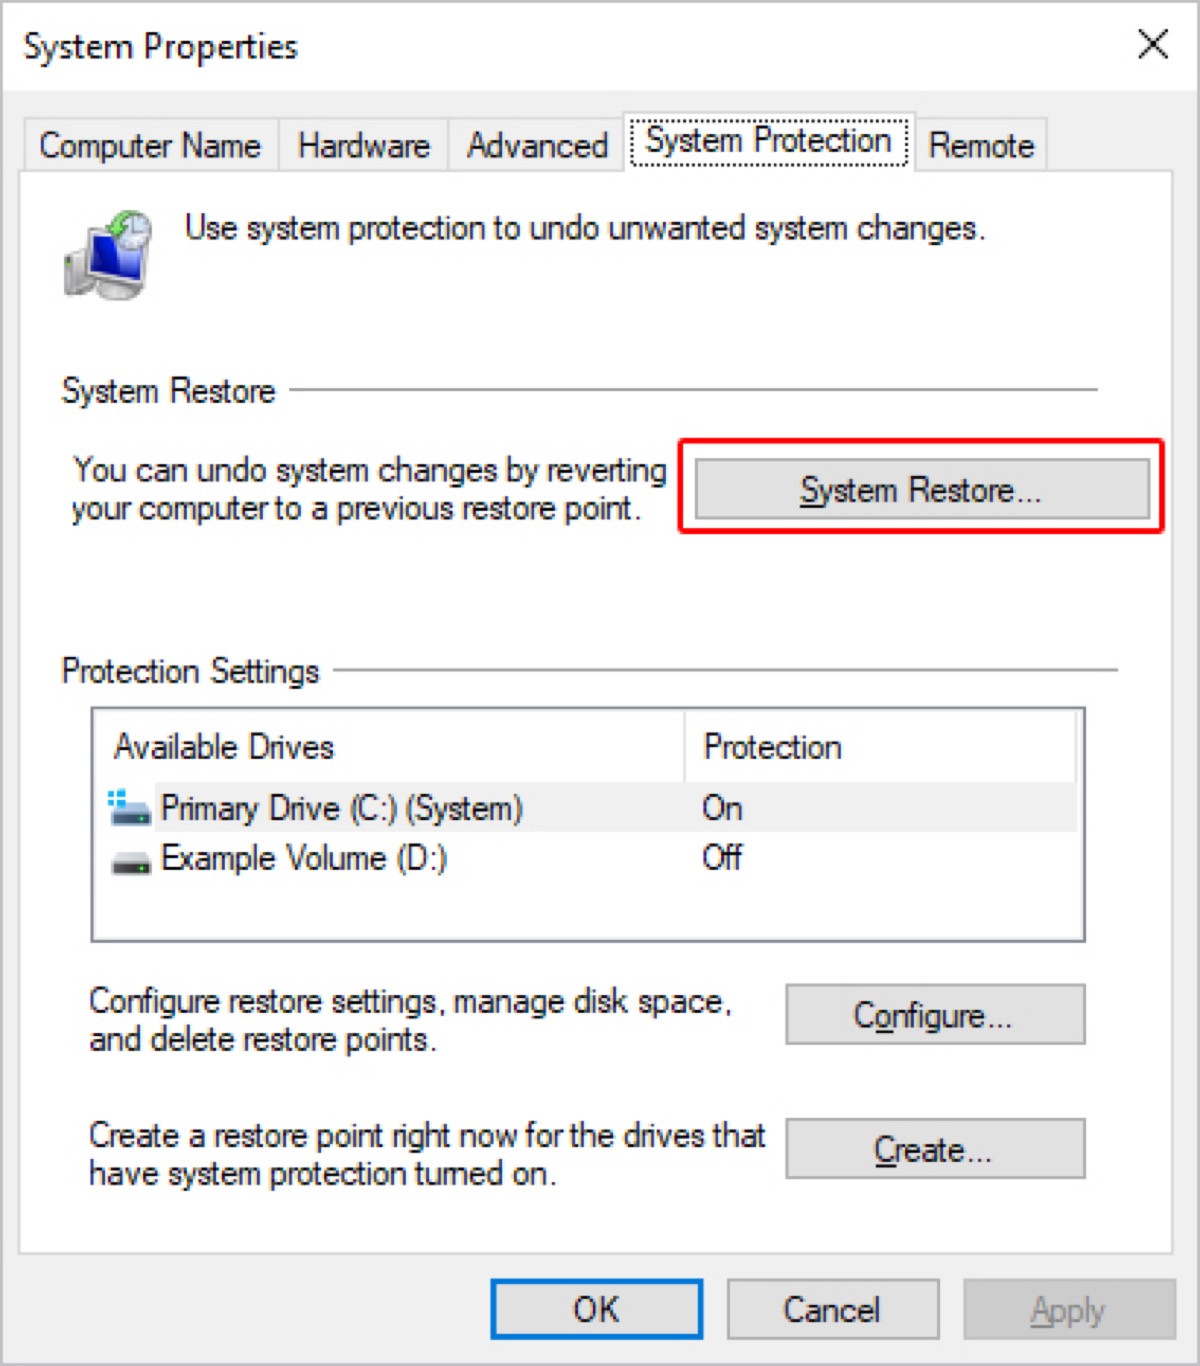 Restore system from System Properties